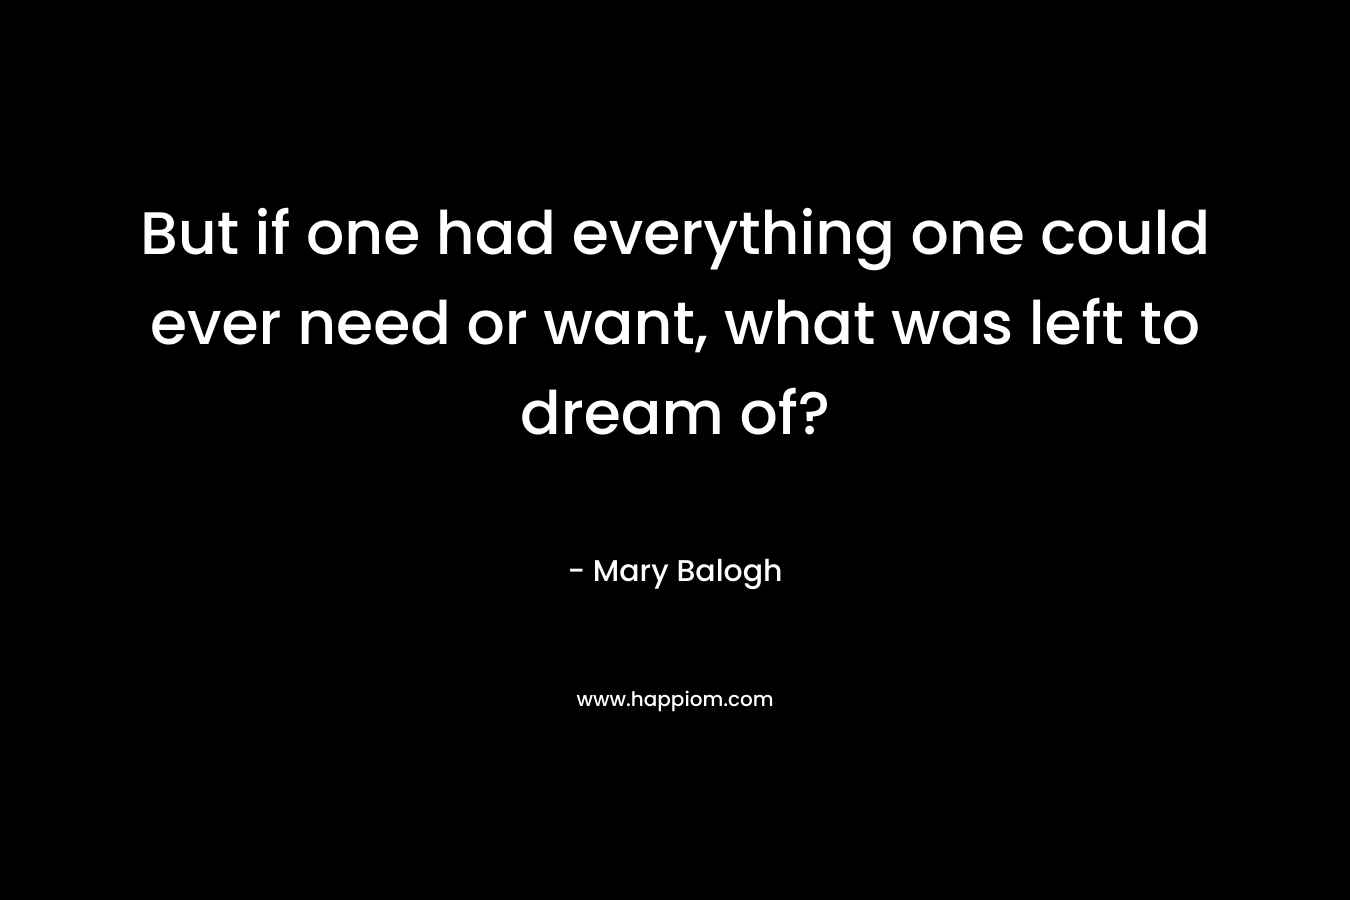 But if one had everything one could ever need or want, what was left to dream of? – Mary Balogh